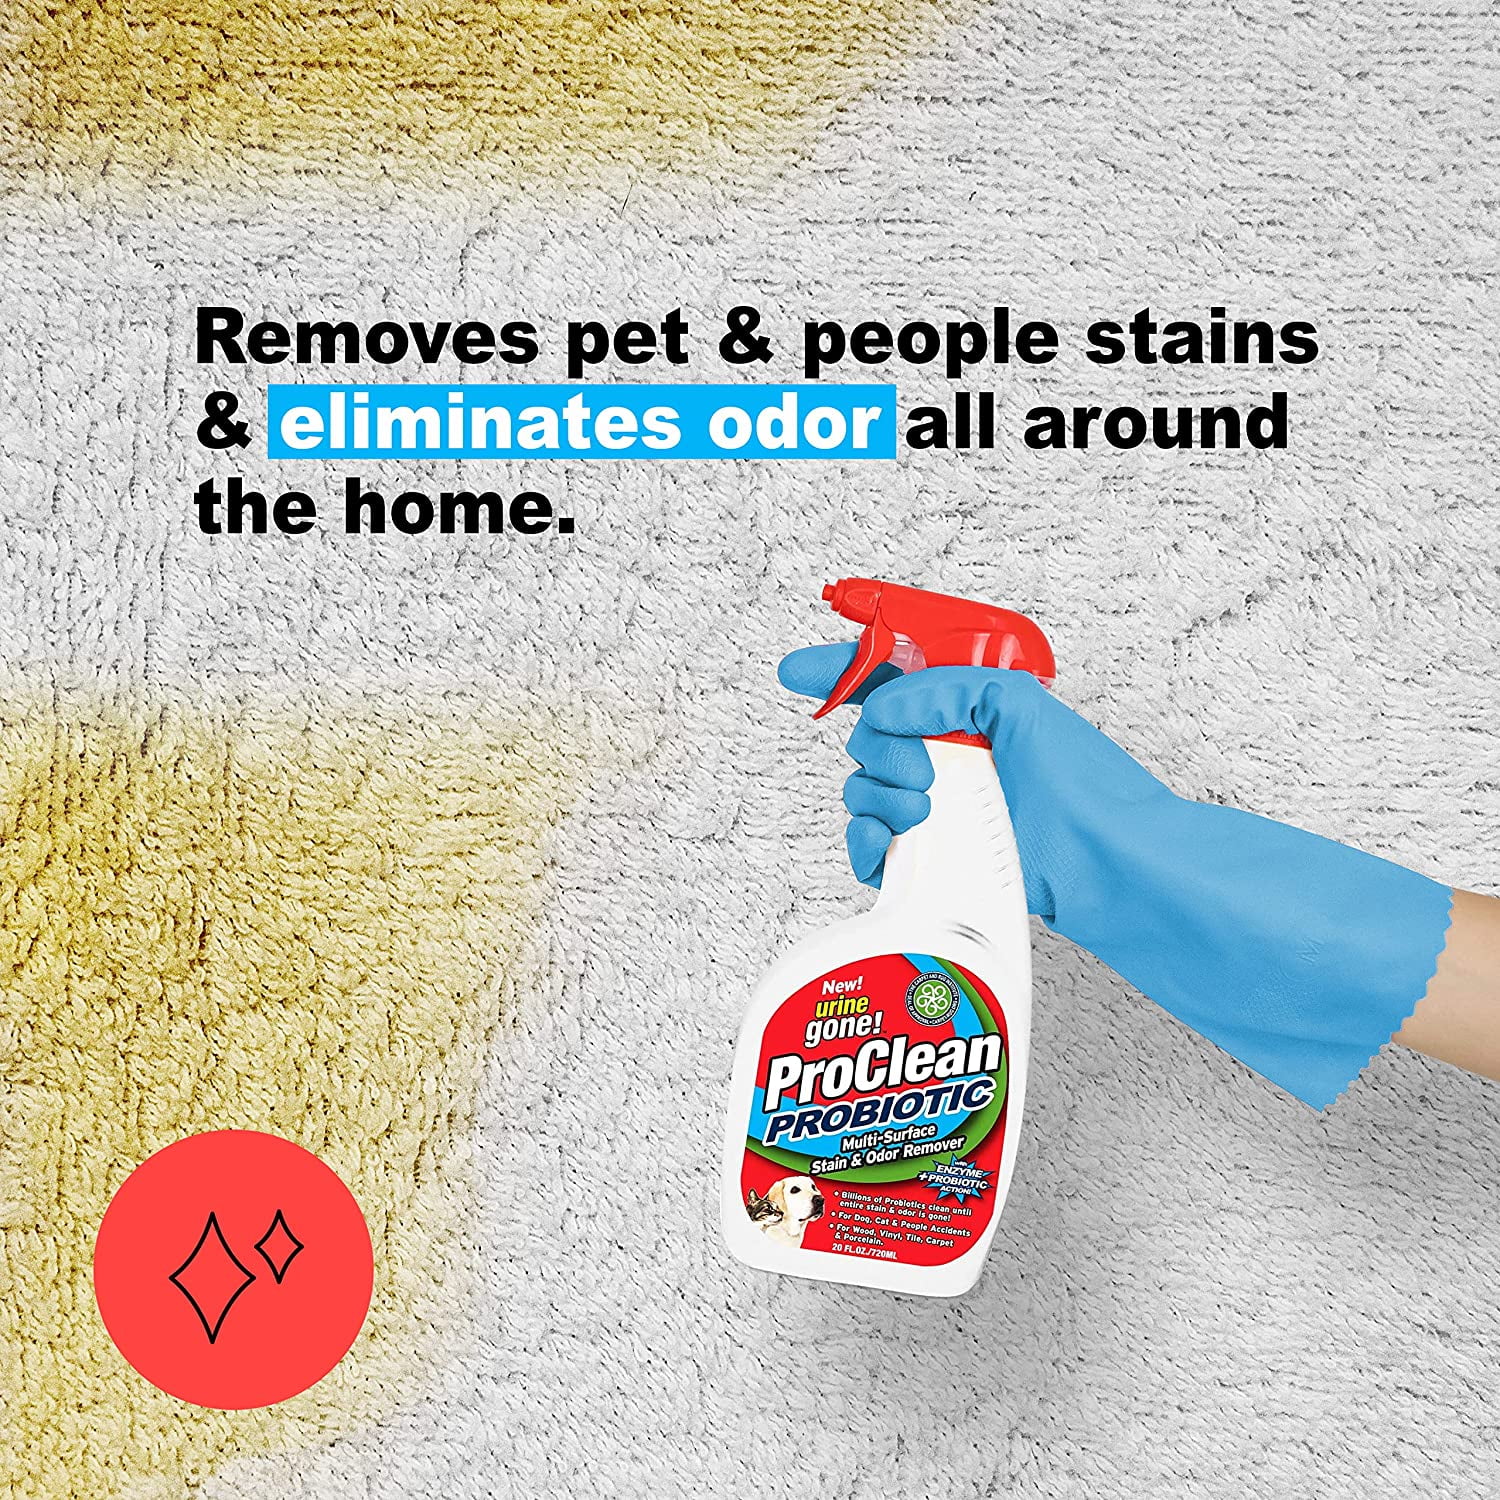 Urine Gone ProClean Stain and Odor Remover Probiotic Multisurface Eliminates Tough Dog Cat People Stains and Odor On Wood Carpet Vinyl and Tile Floors